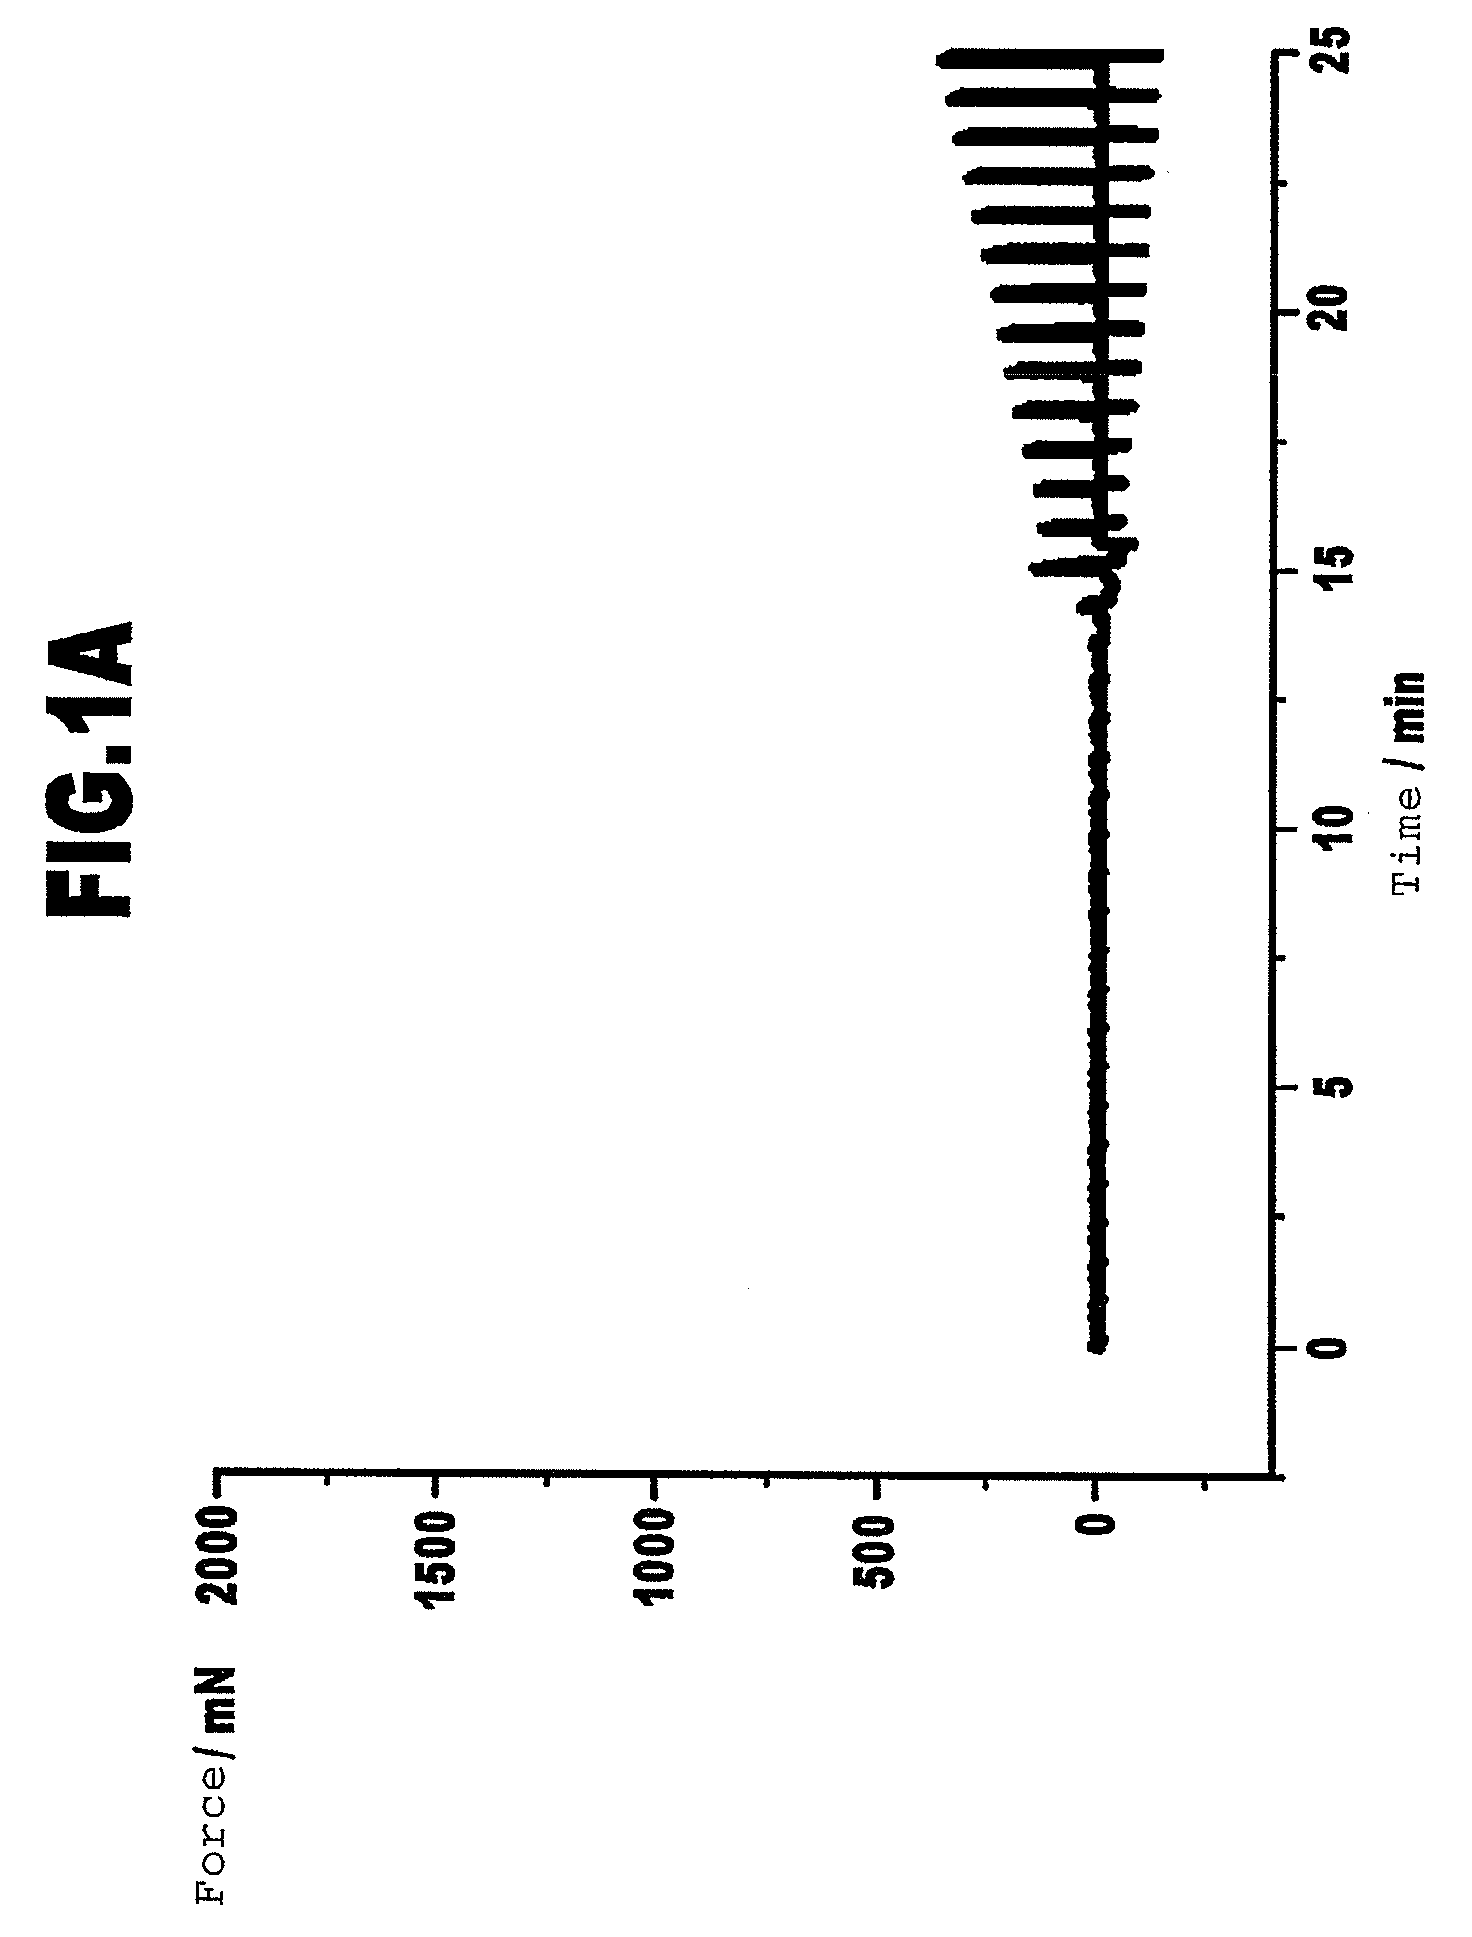 Use of gelatin and a cross-linking agent for producing cross-linking medical glues